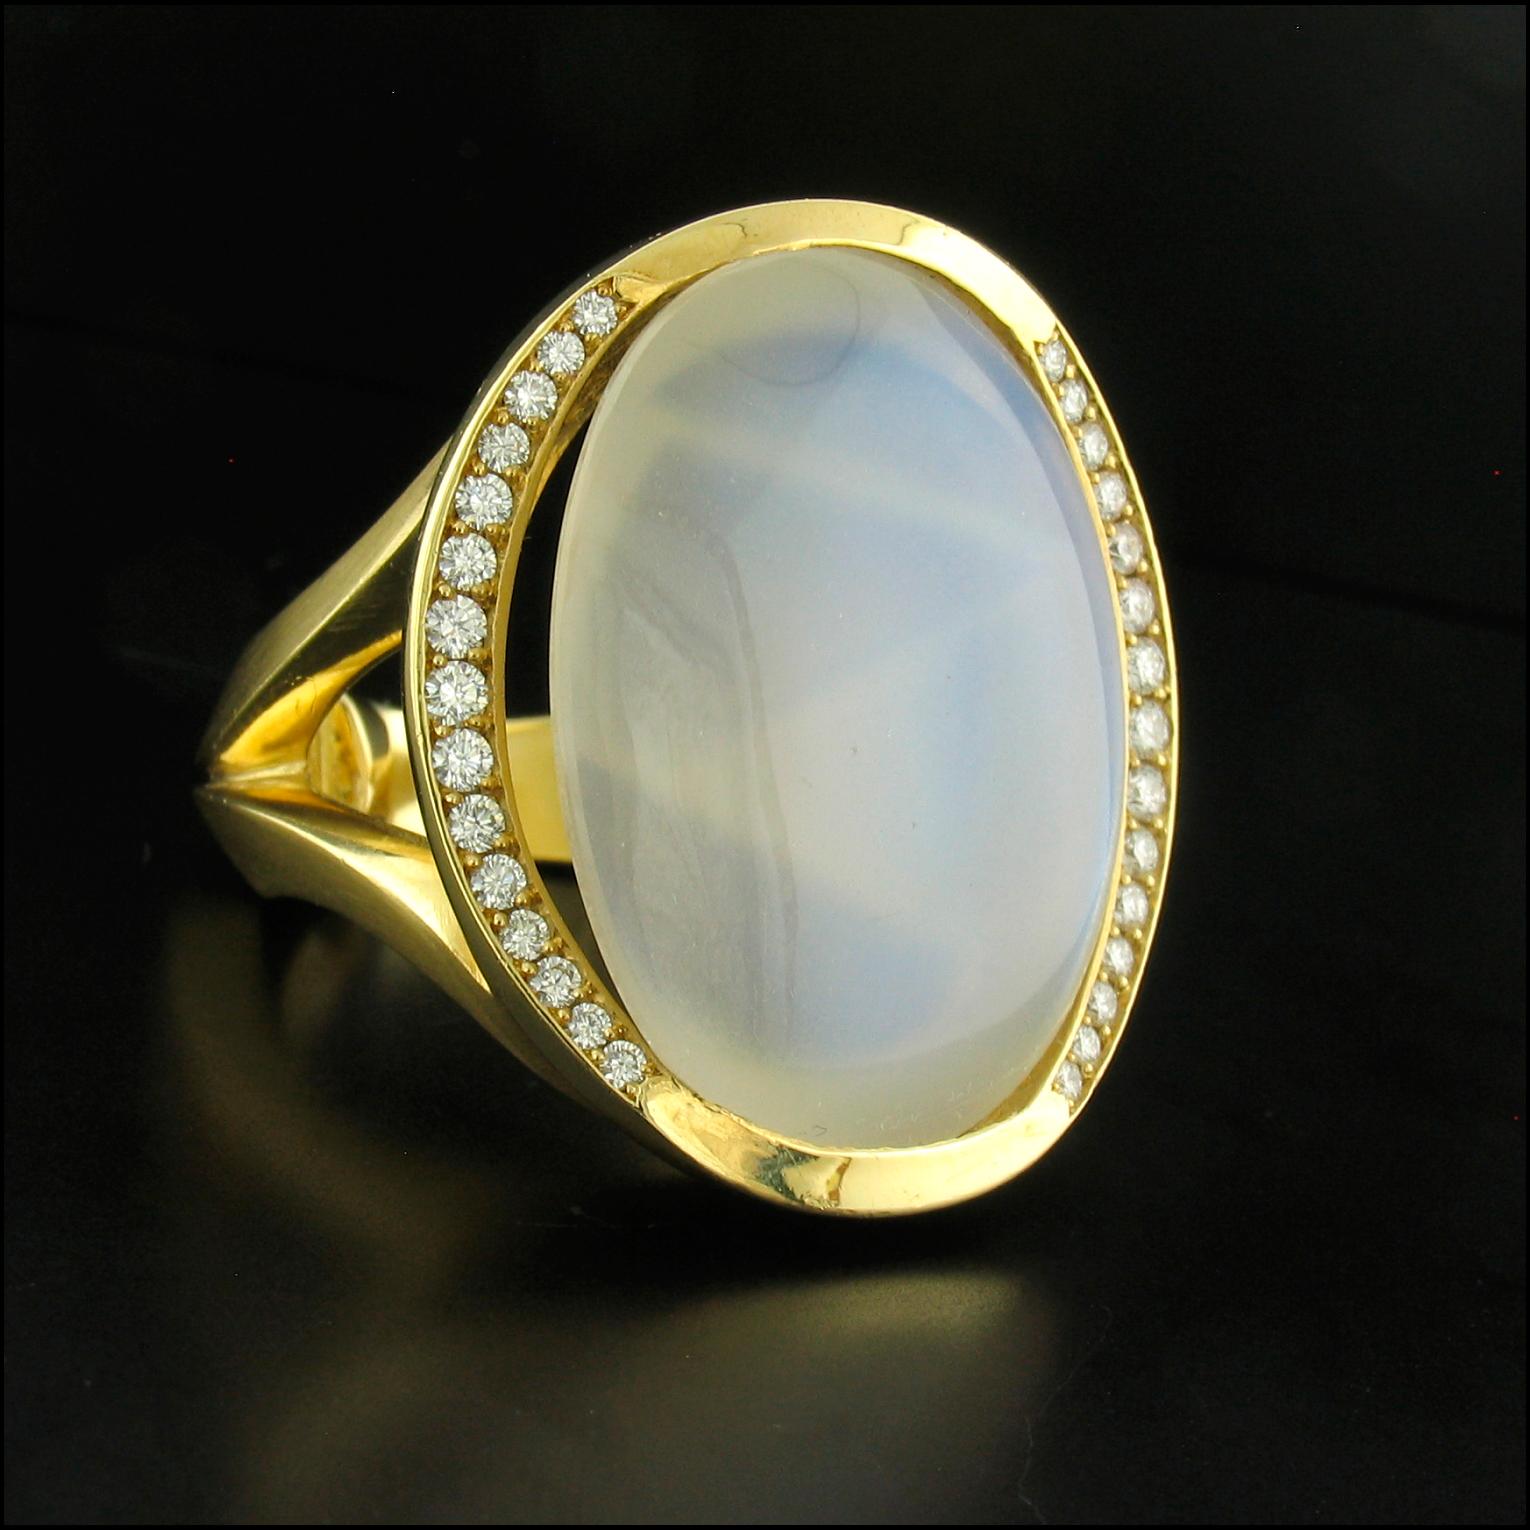 This ring was designed by Susan Helmich and features a spectacular, irreplaceable, glowing, oval-shaped, Munsteiner cut Blue Moonstone weighing 27.12 carats.  A very difficult color to capture in photos, one can see the cut and color more clearly on